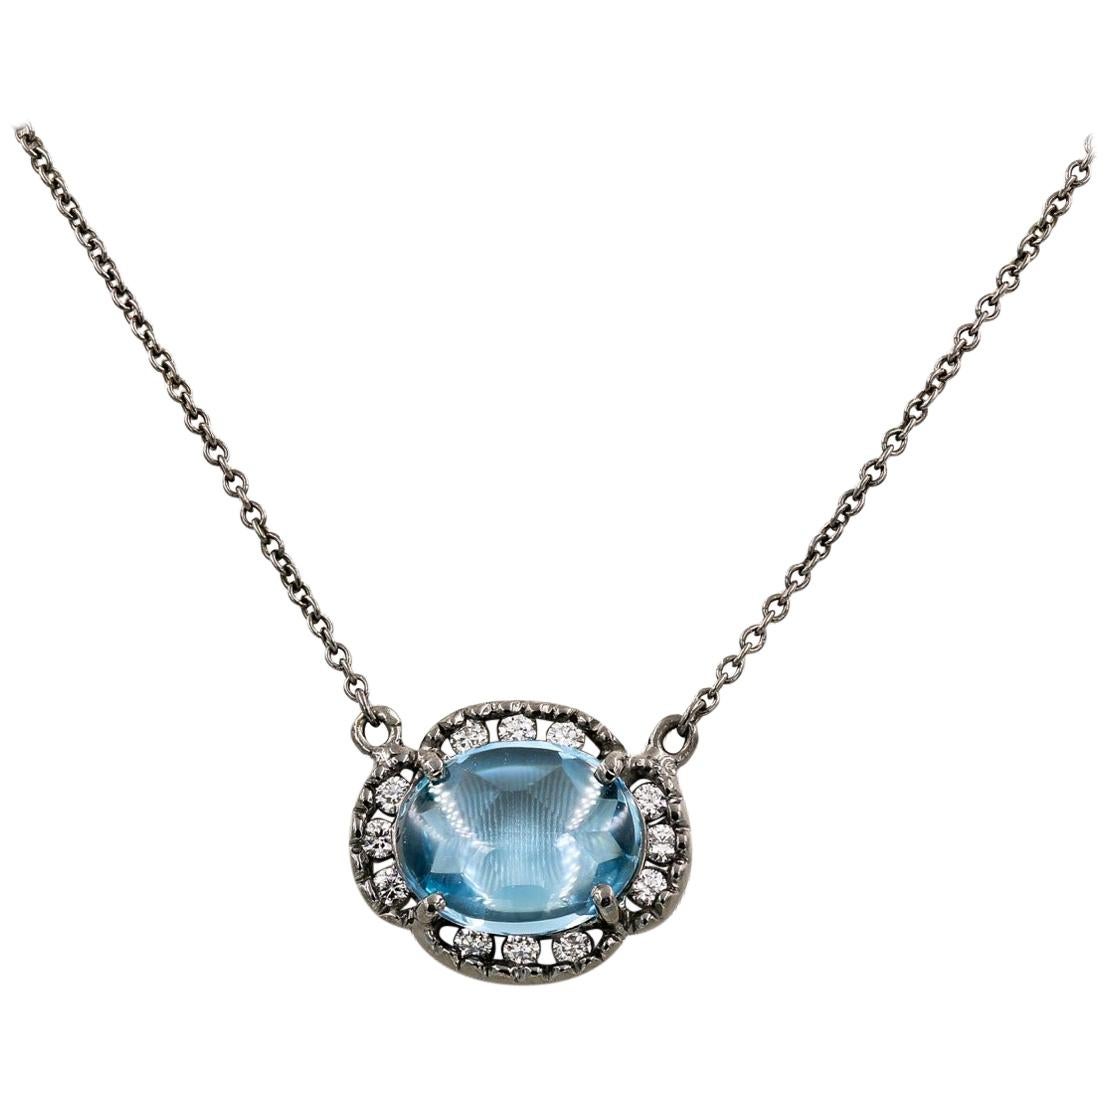 Oval Cut Cabochon Blue Topaz and Round Diamond Necklace